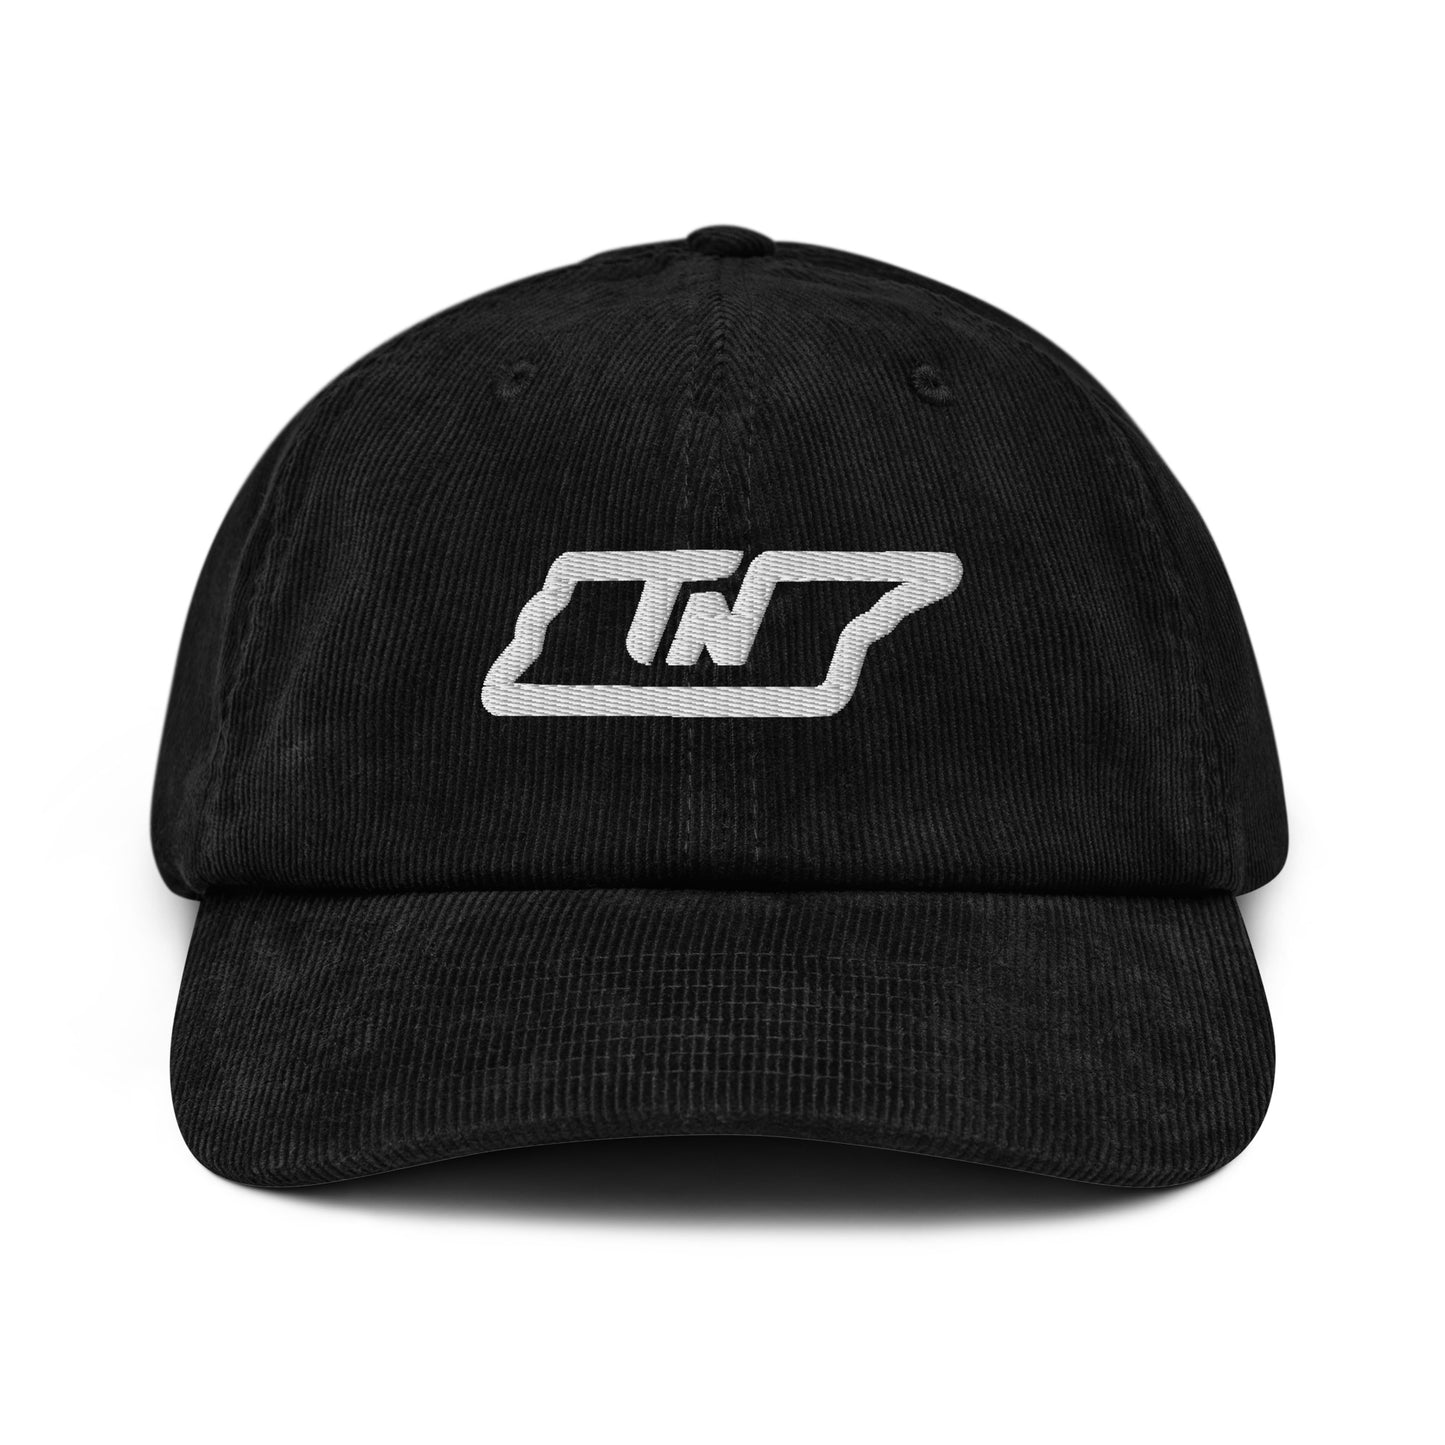 State of TN Corduroy Hat